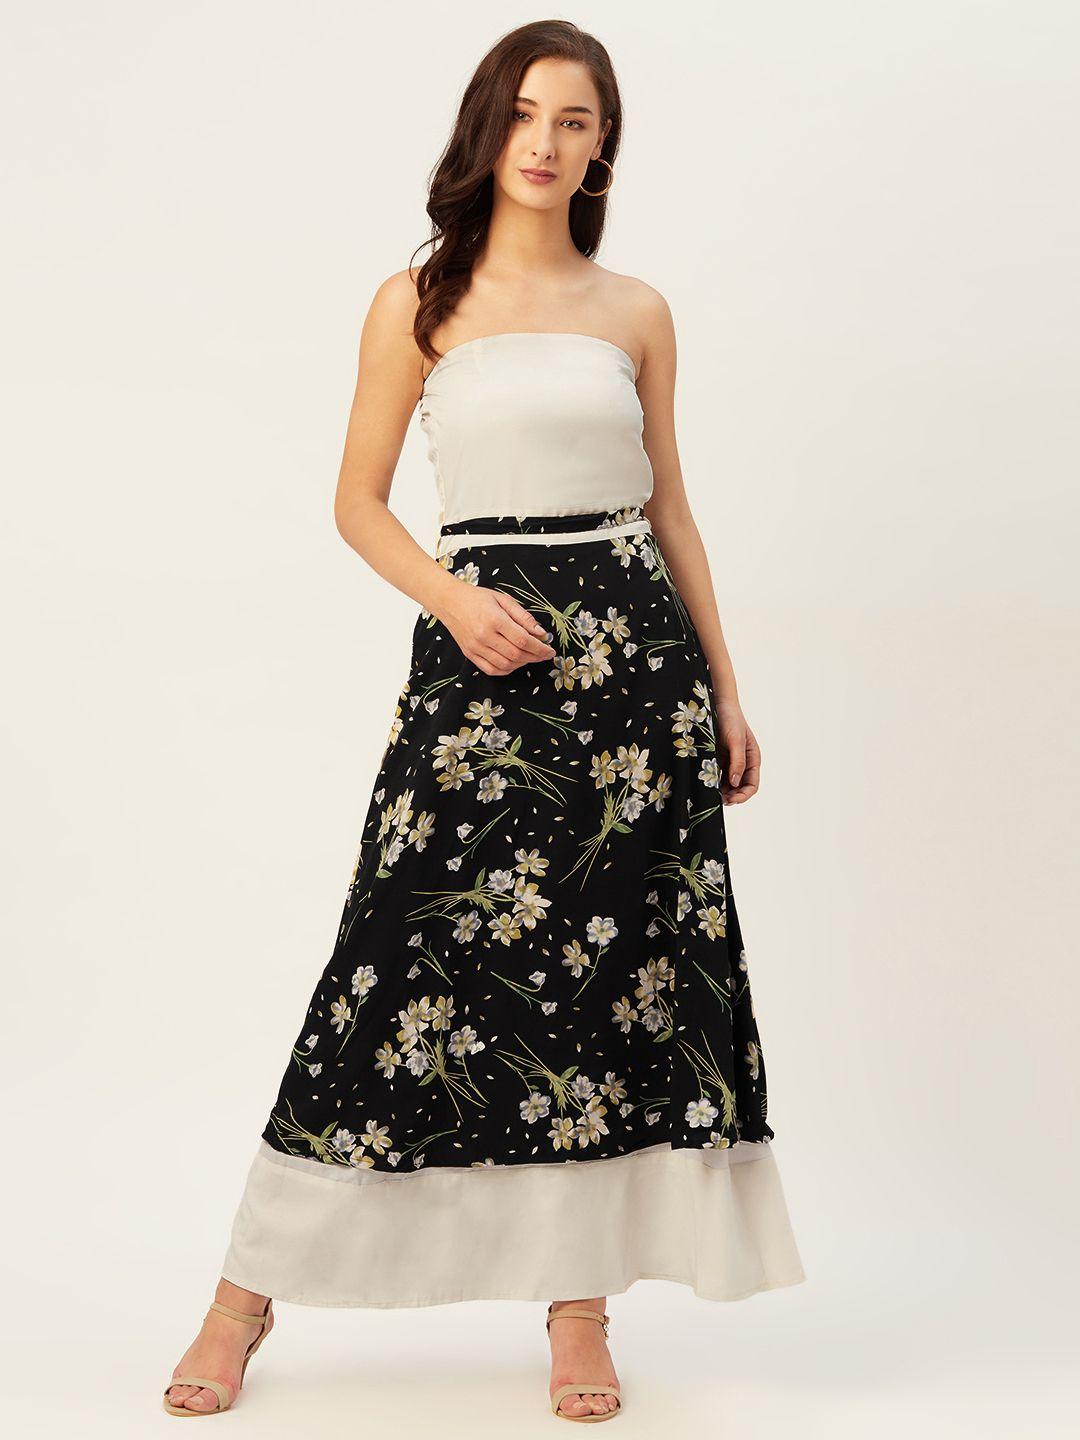 belle-fille-women-black-&-off-white-floral-print-layered-maxi-a-line-dress-with-tie-ups